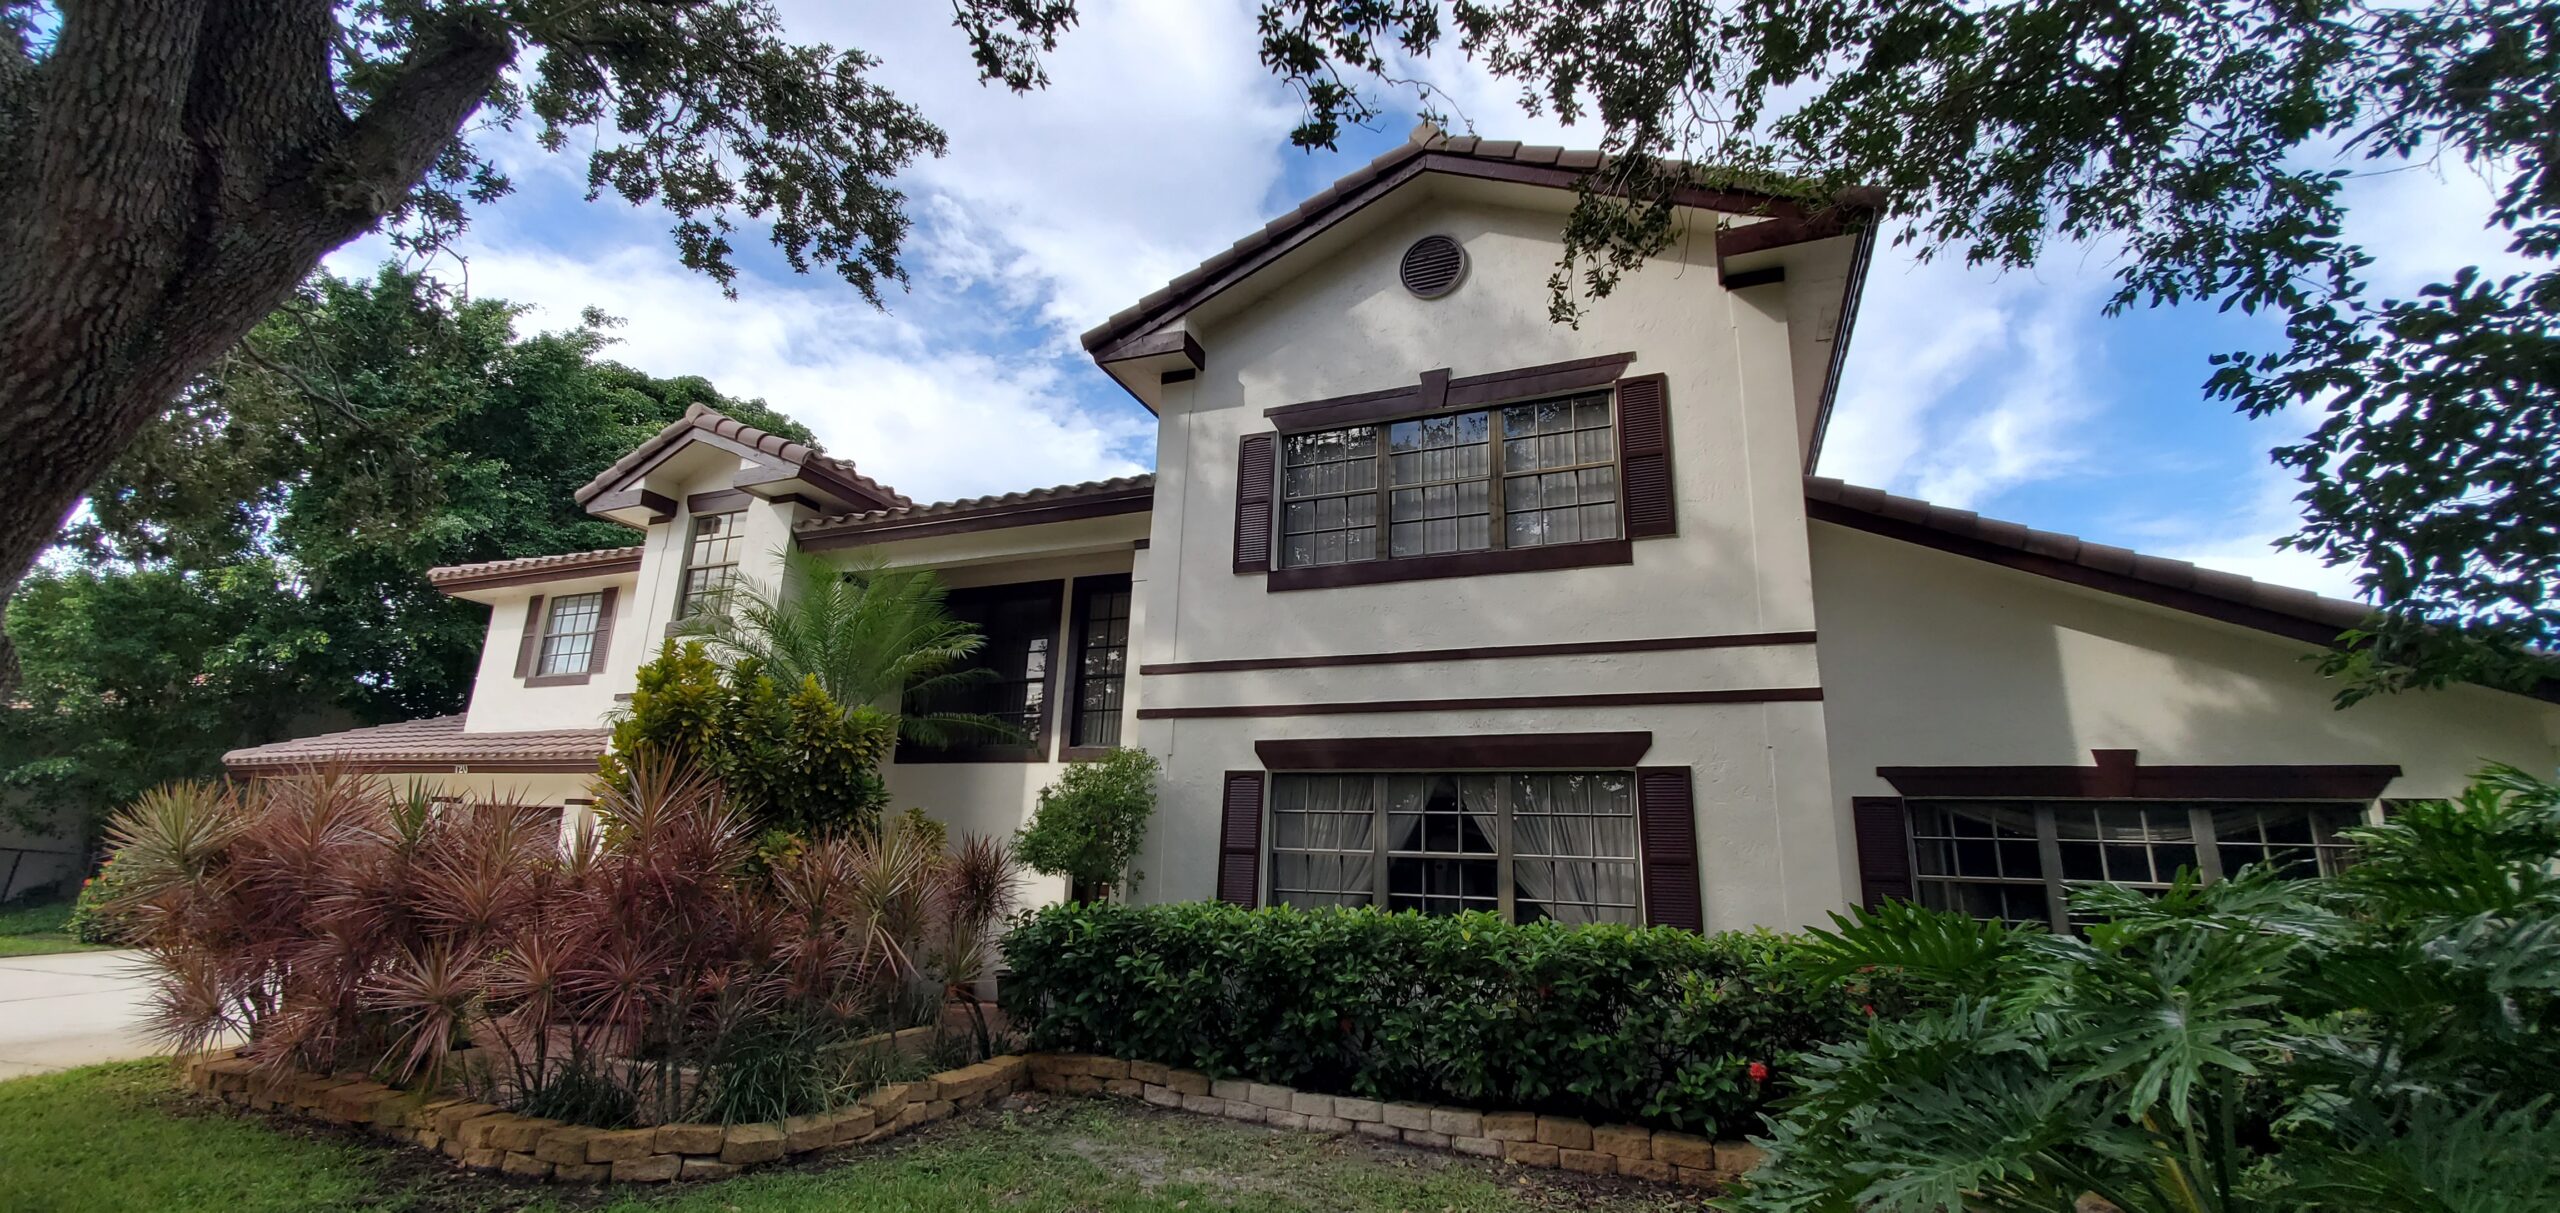 Why you Need an Exterior House Painting Estimate in South Florida: